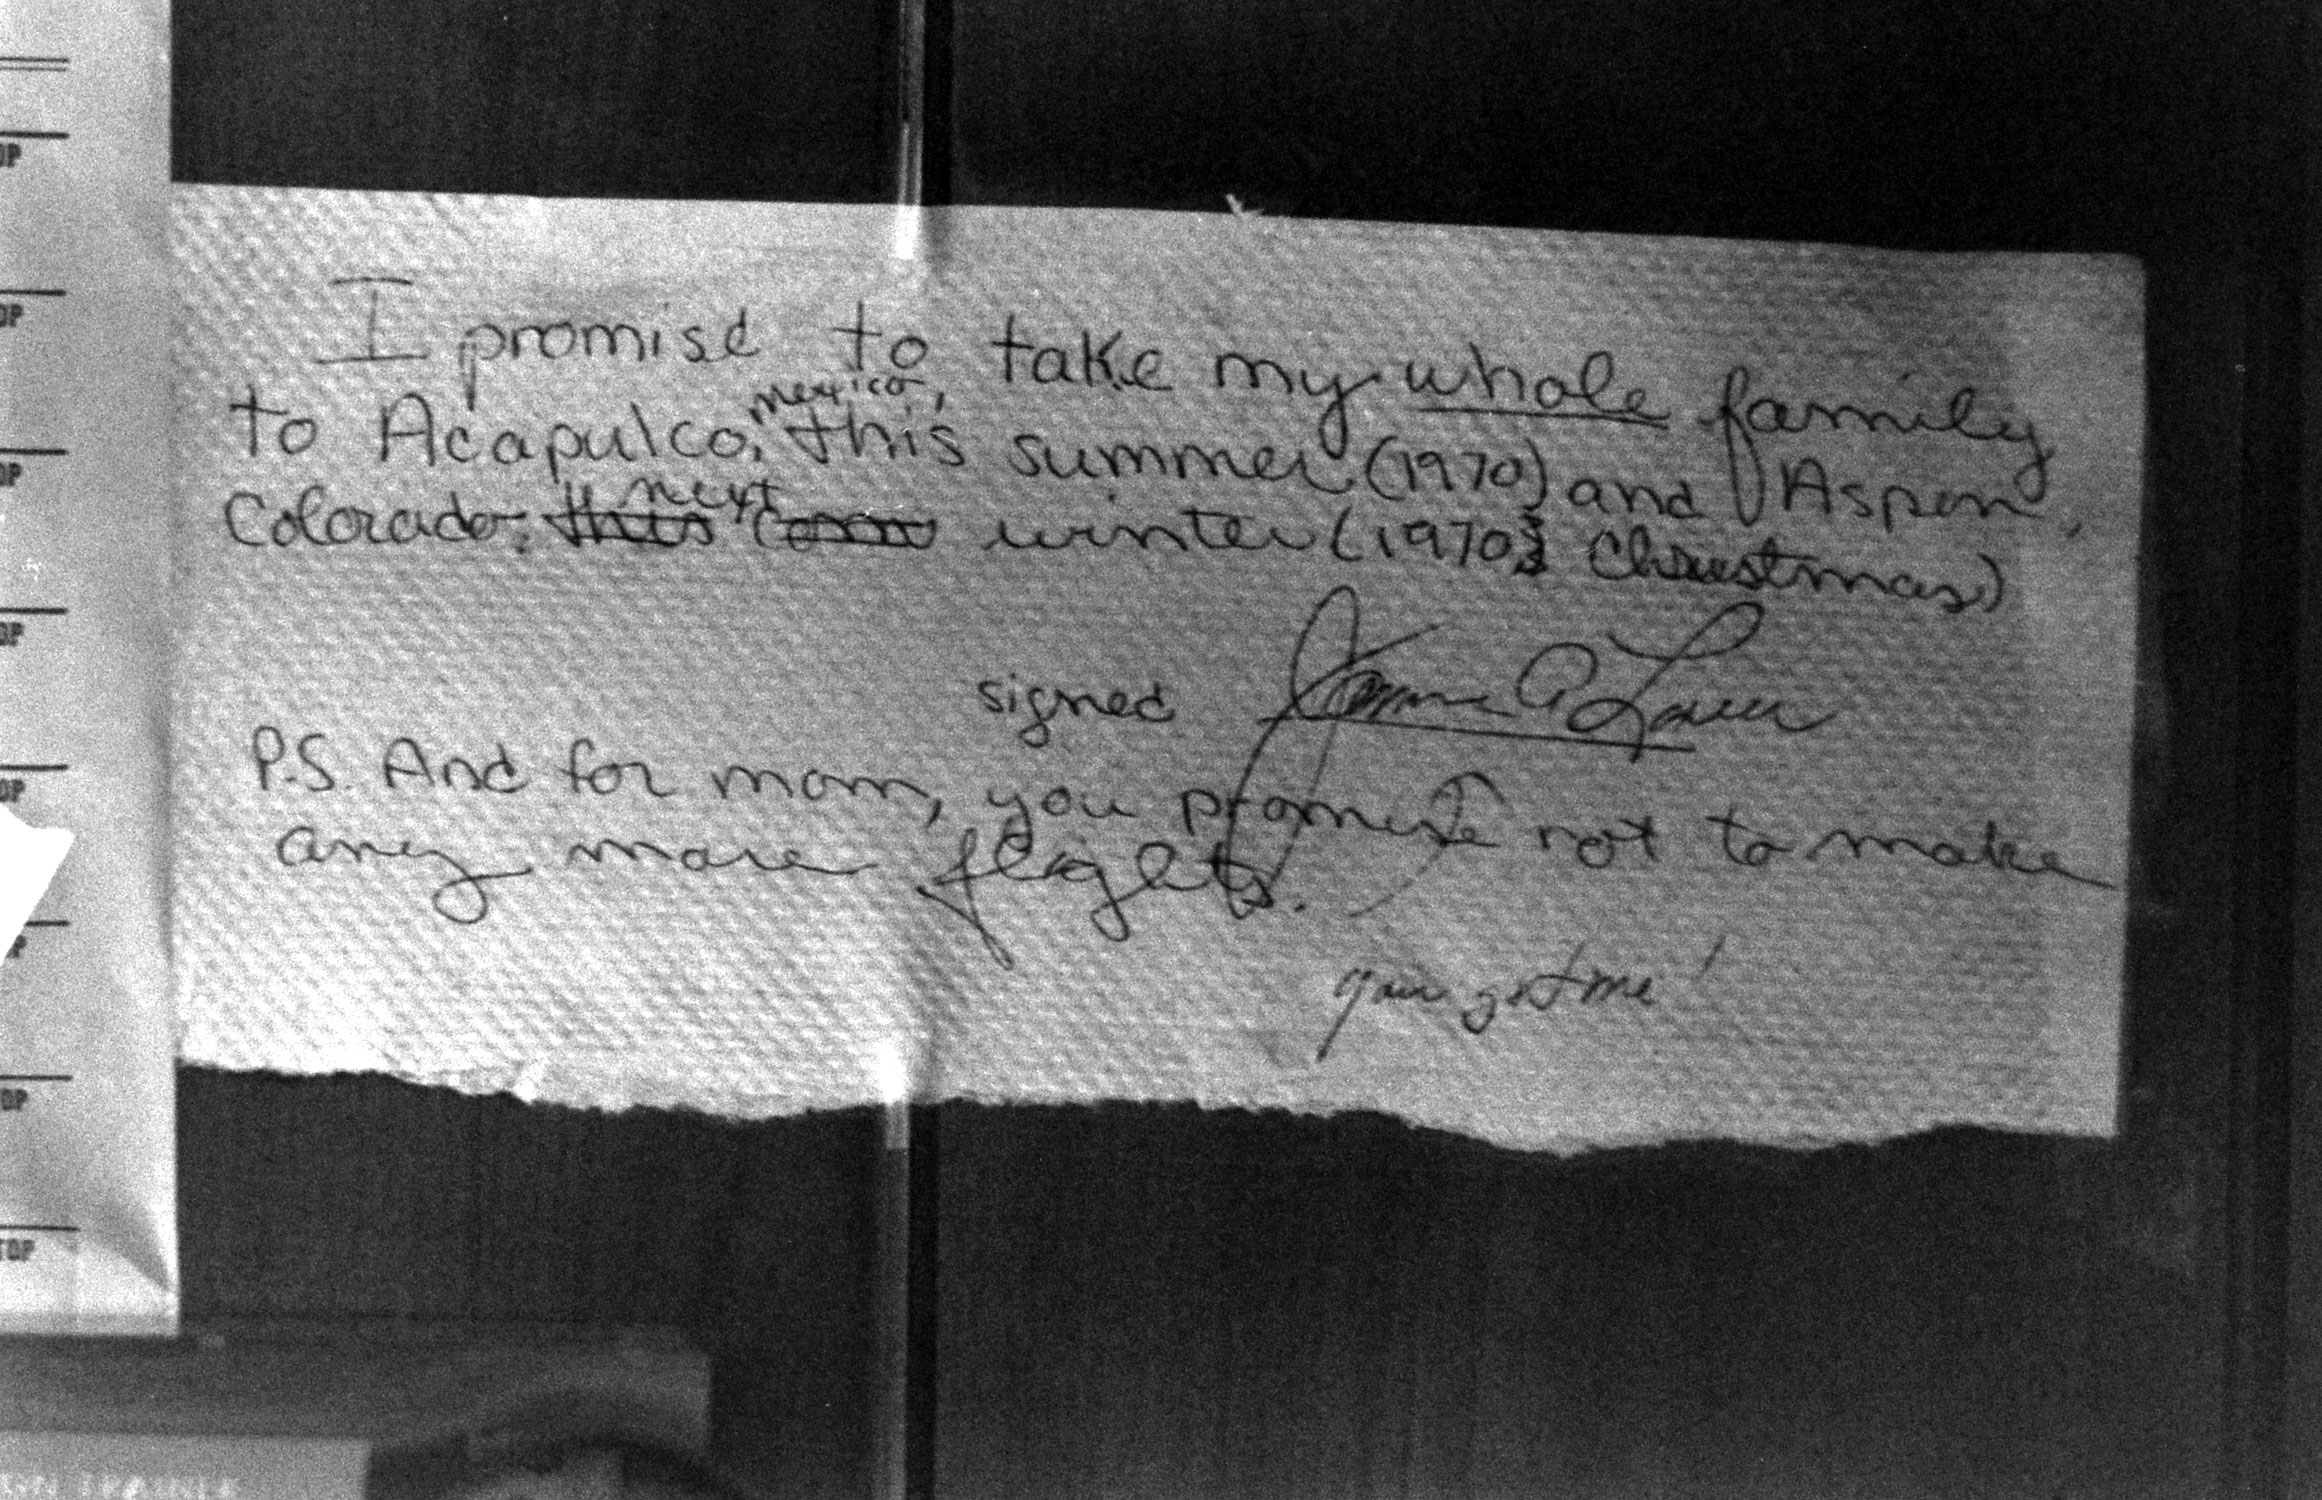 A hand-written note from astronaut James Lovell to his family, promising to take them on vacations to Acapulco and Aspen, 1970.